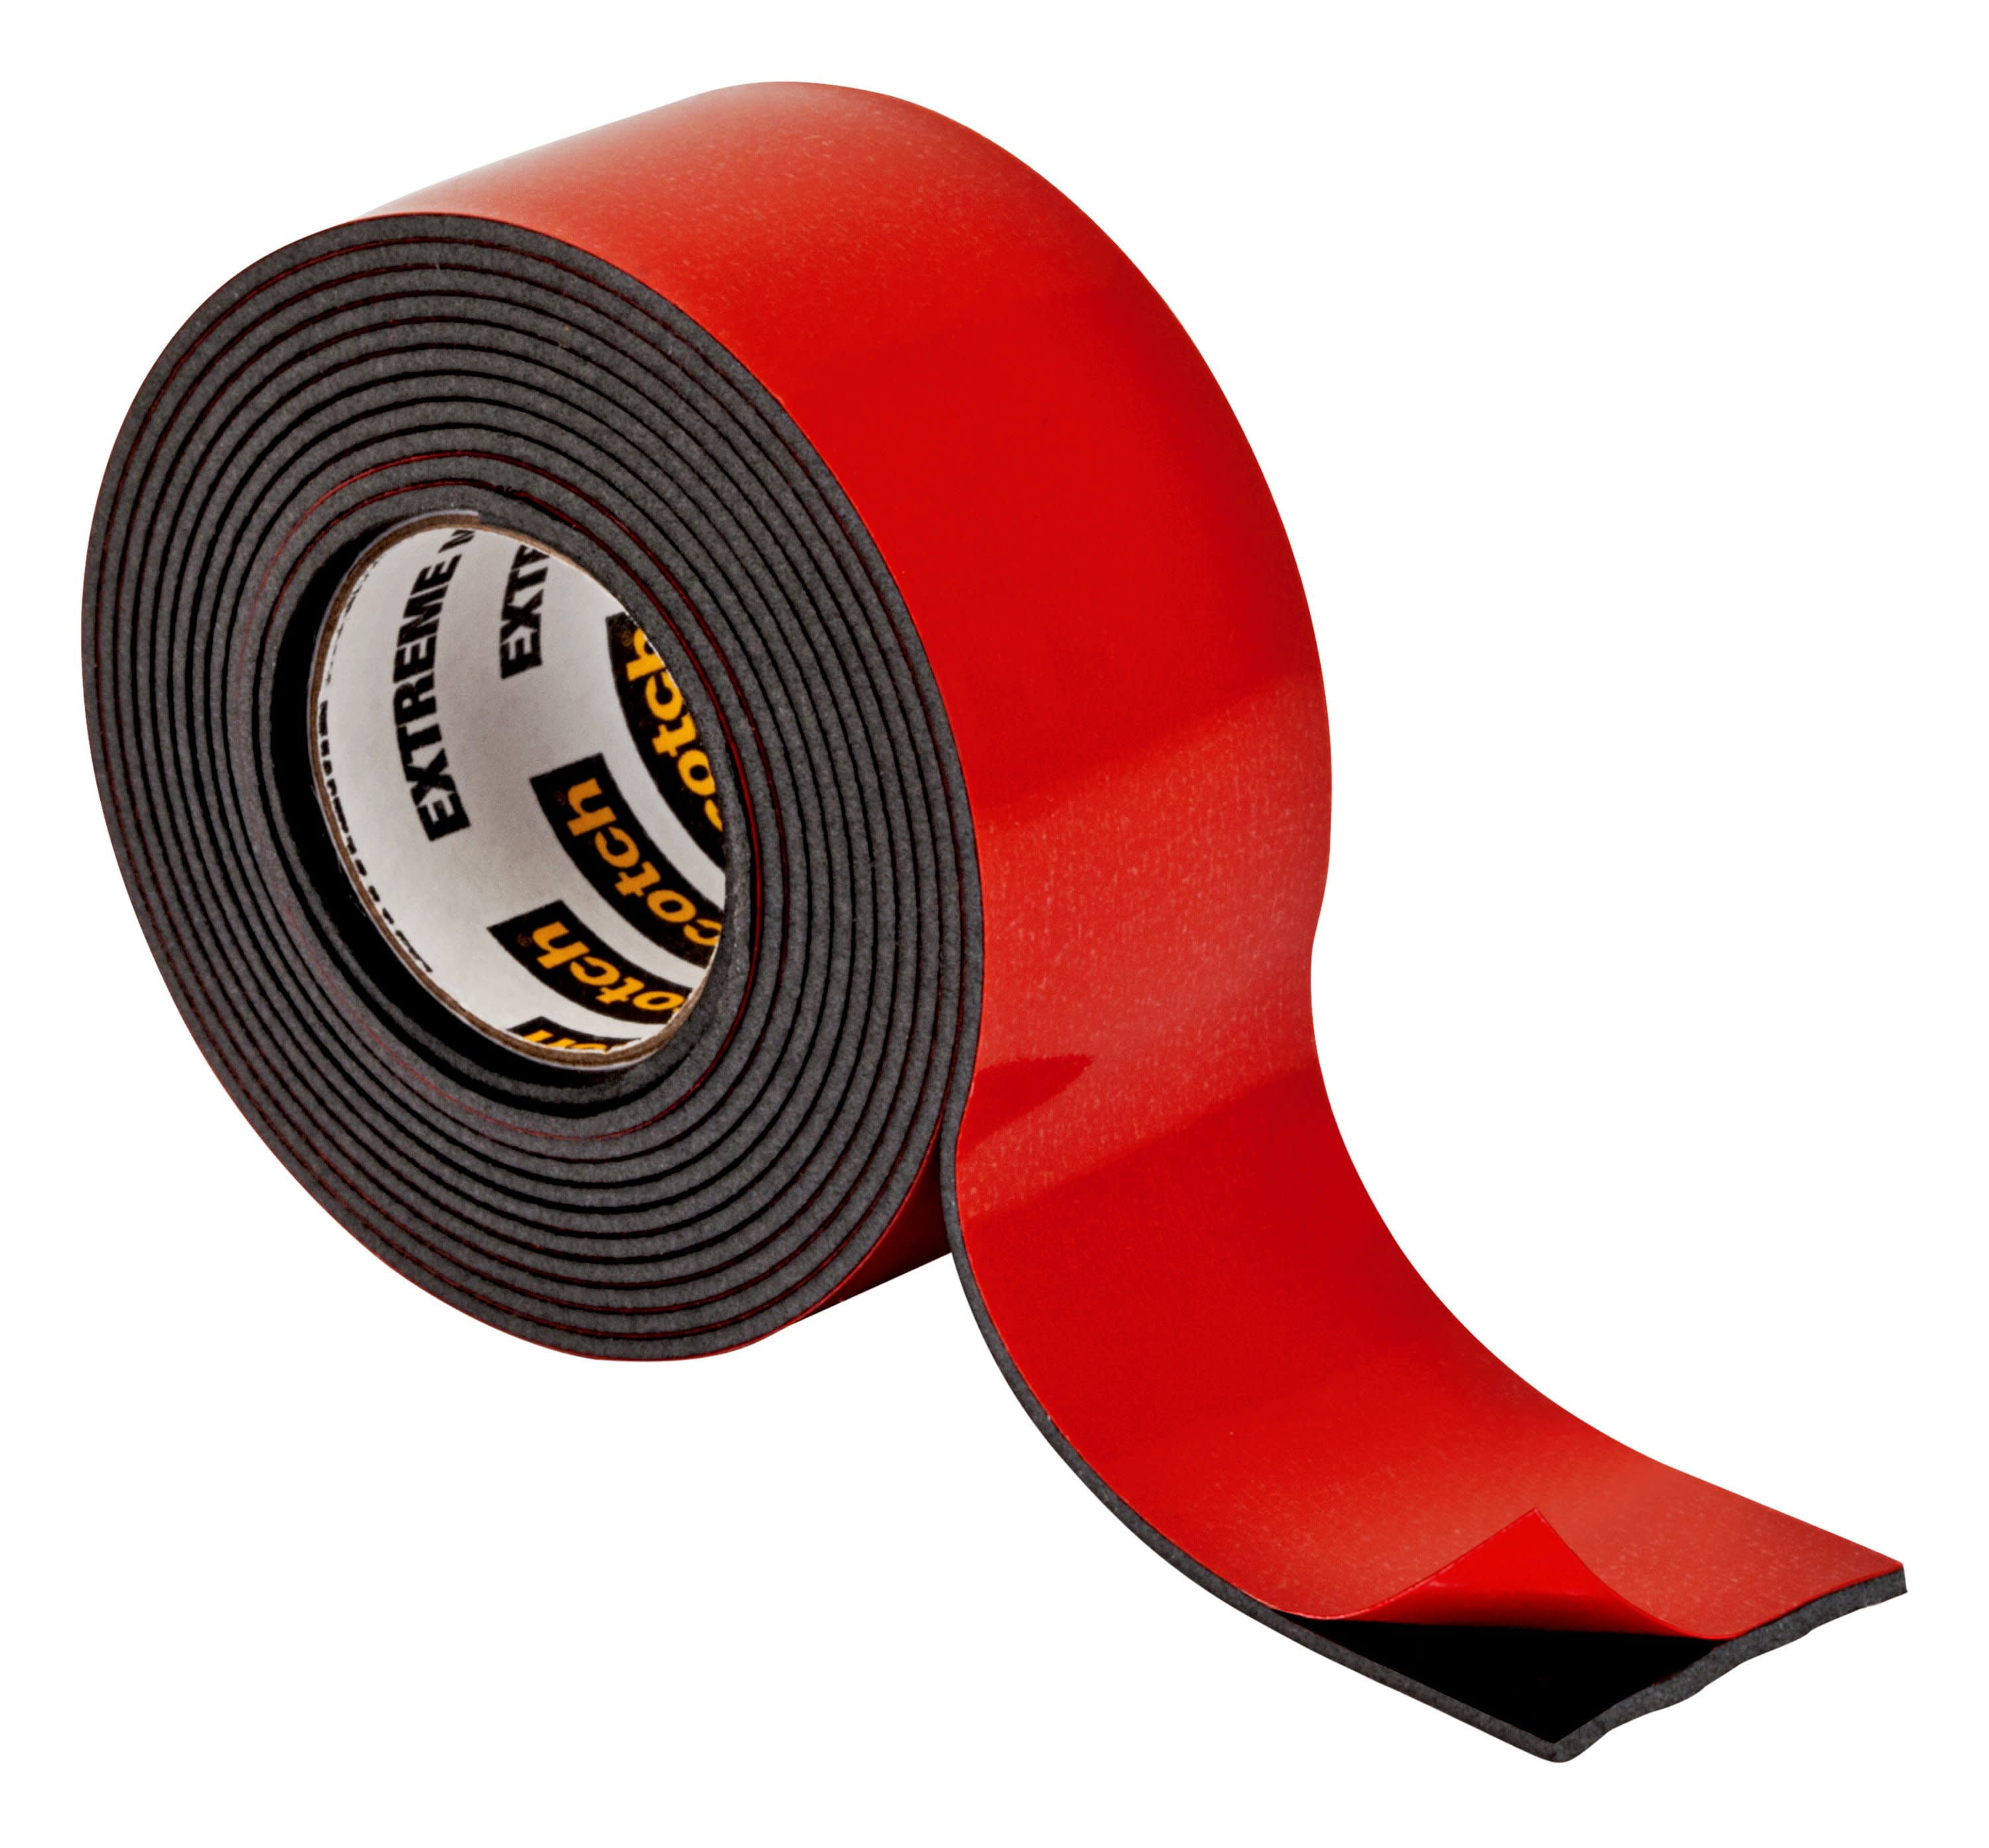 8-1/2 ft. x 3/4 in. Double-Sided Mounting Tape